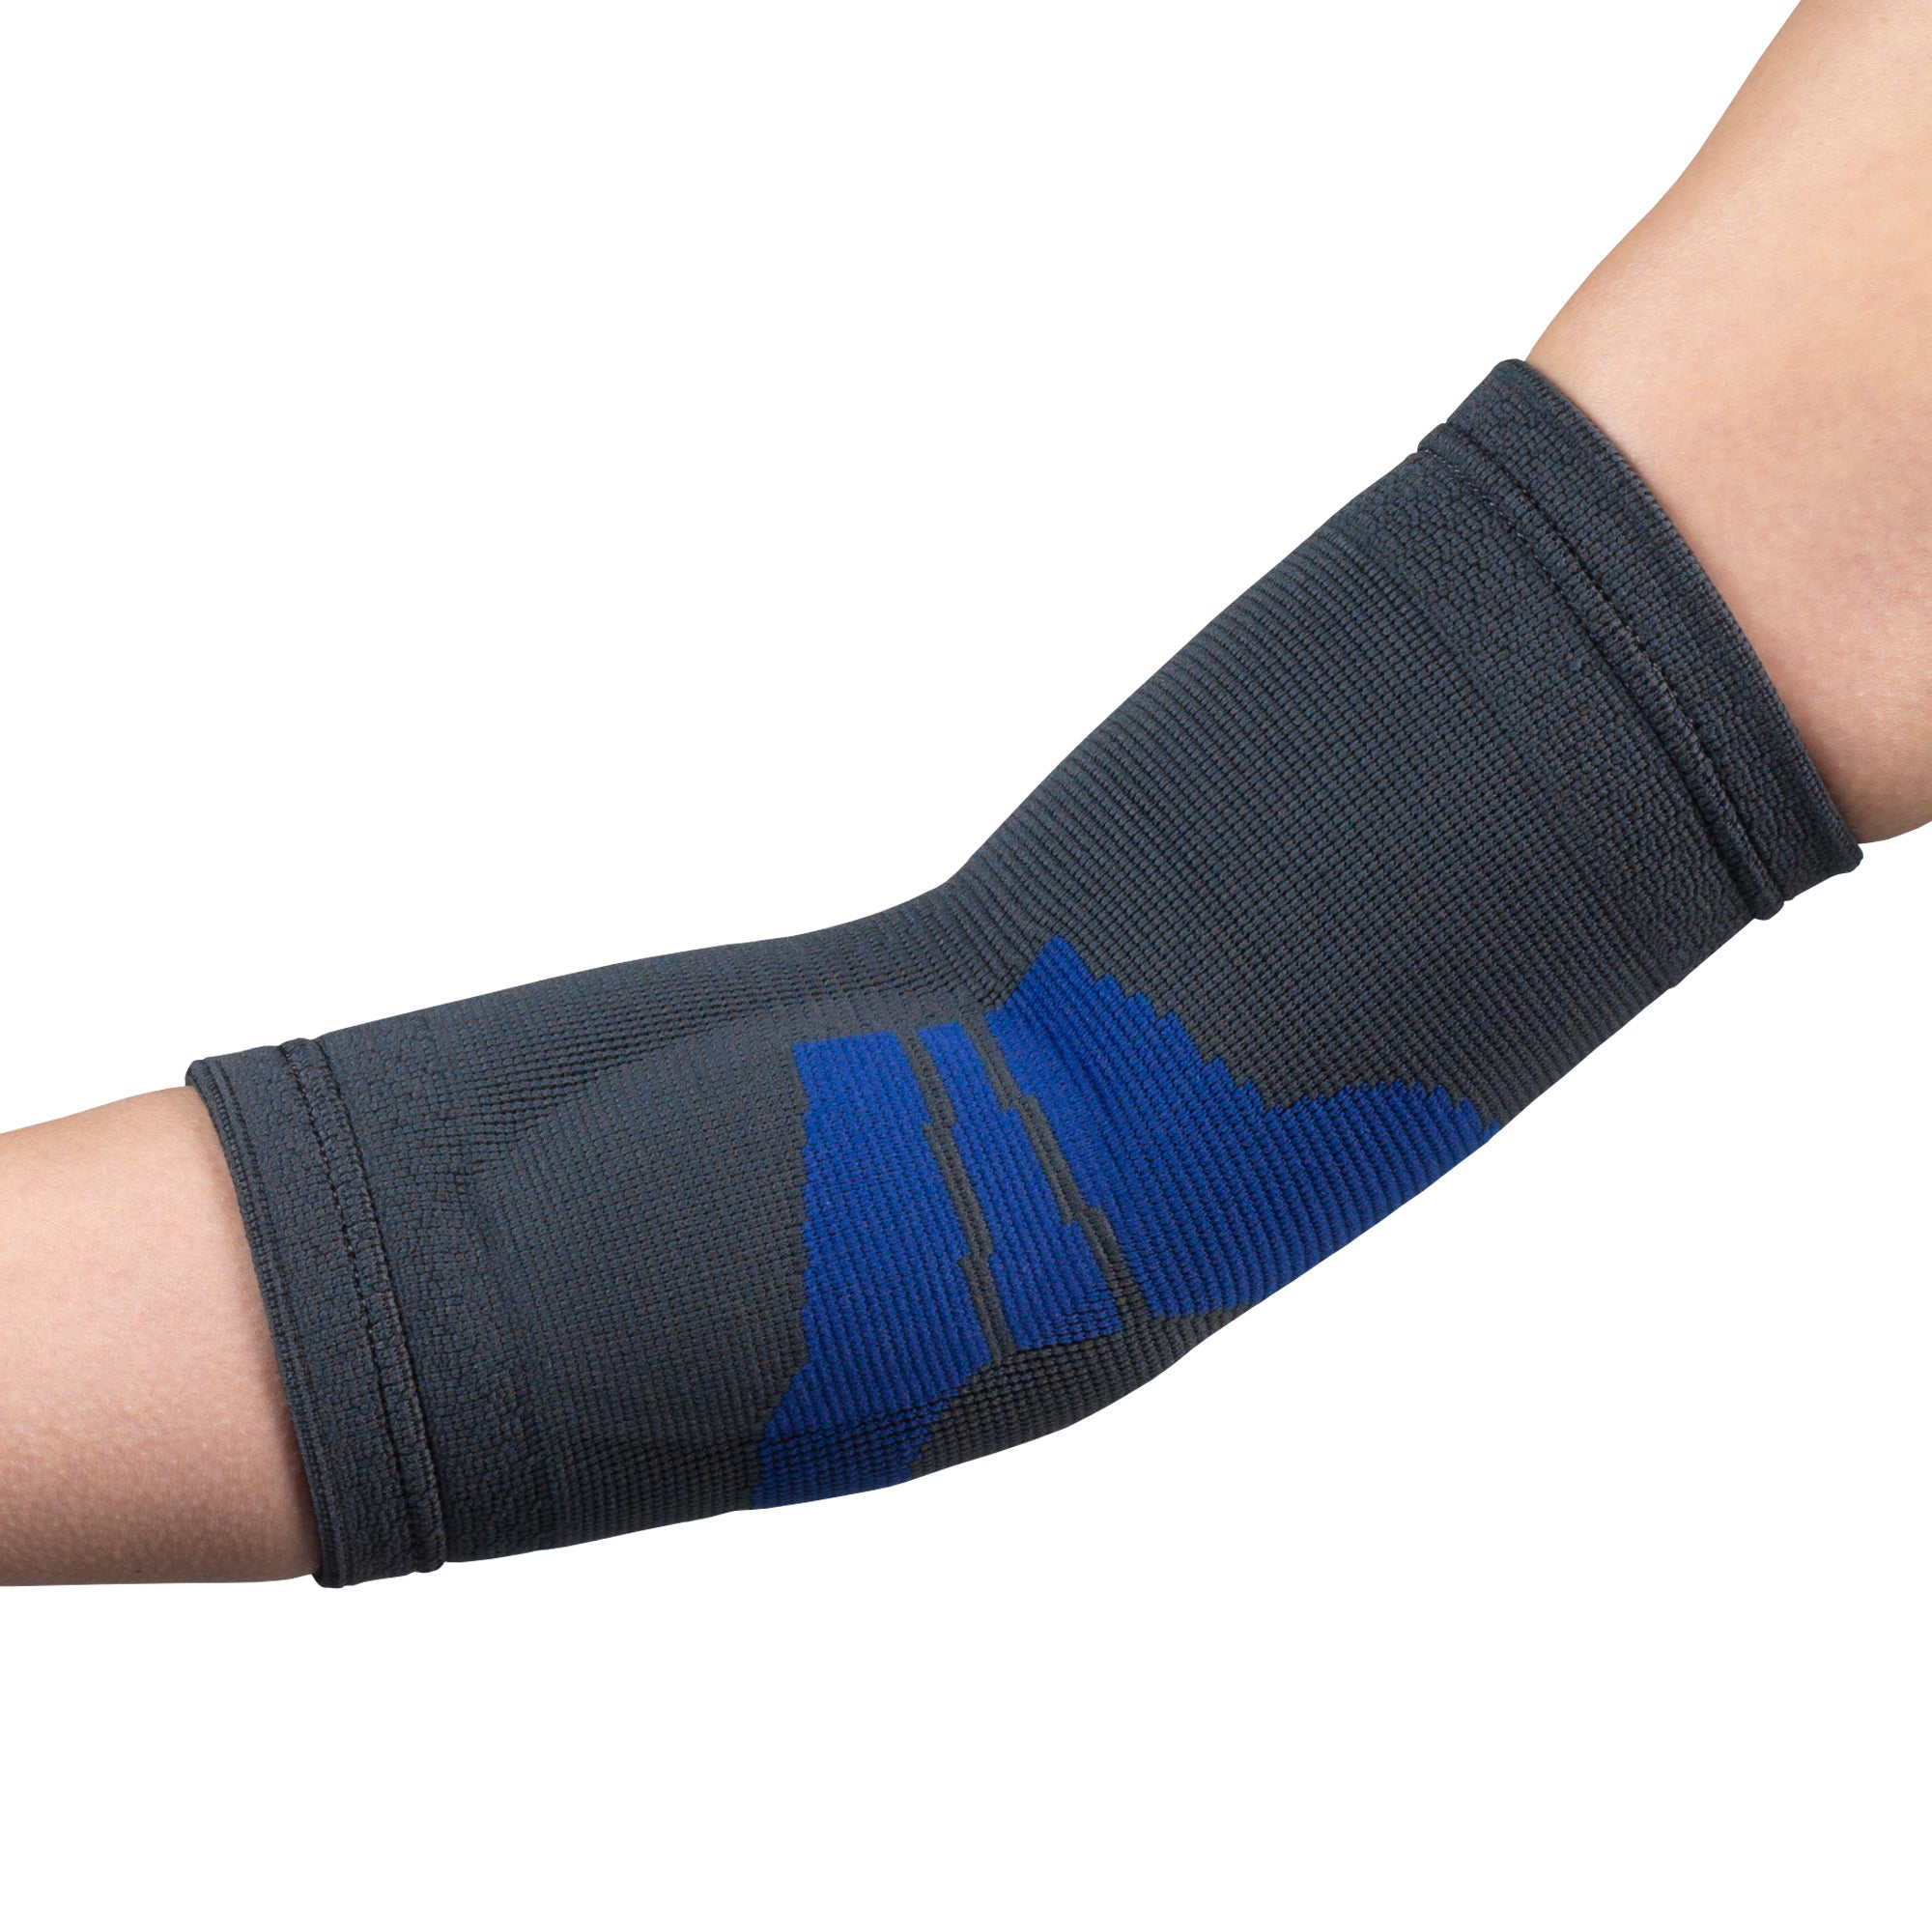 Elbow Brace - PRO #430 Padded Elbow Support Sleeve